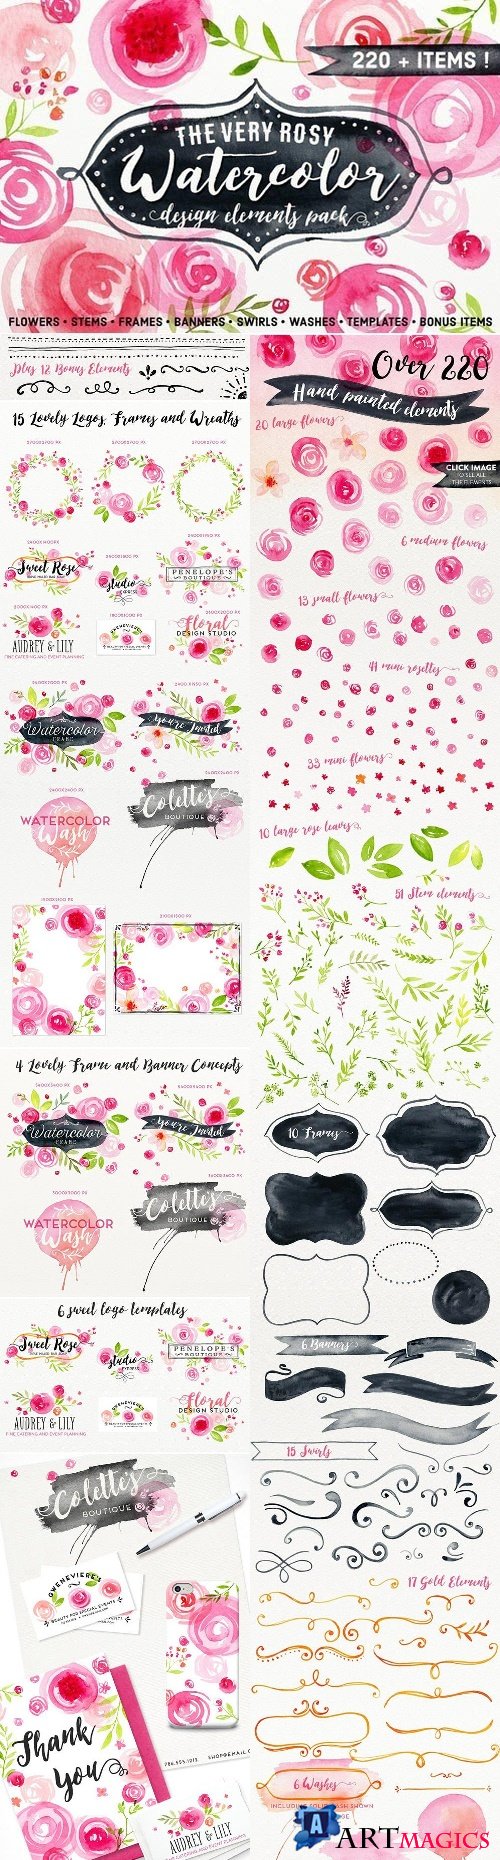 Hand Painted Watercolor Floral Pack 2459000